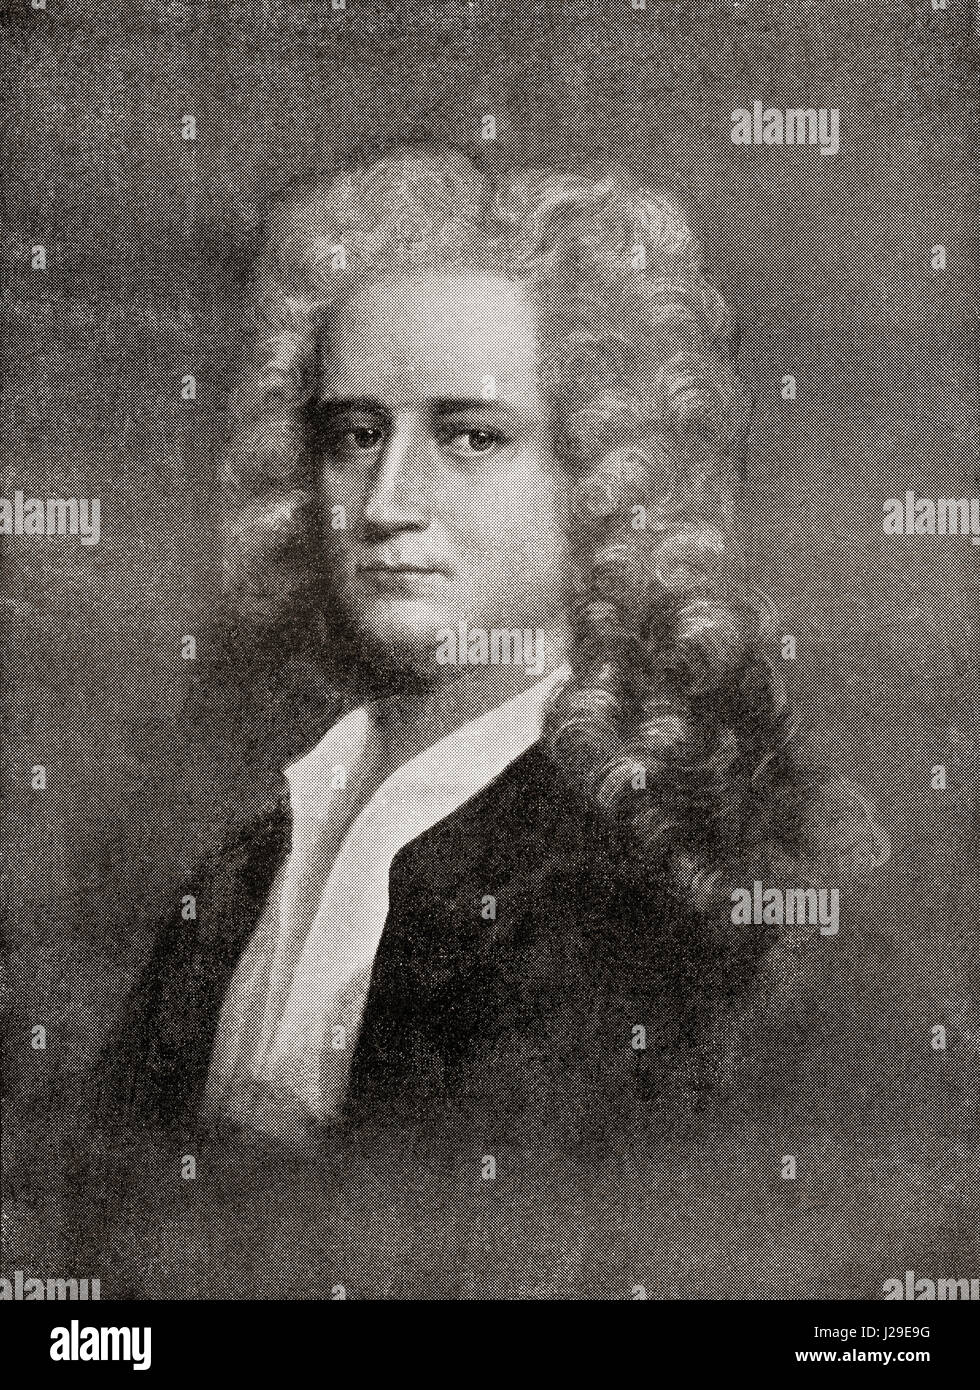 Joseph Addison, 1672 – 1719.  English essayist, poet, playwright, and politician.  From The International Library of Famous Literature, published c. 1900 Stock Photo